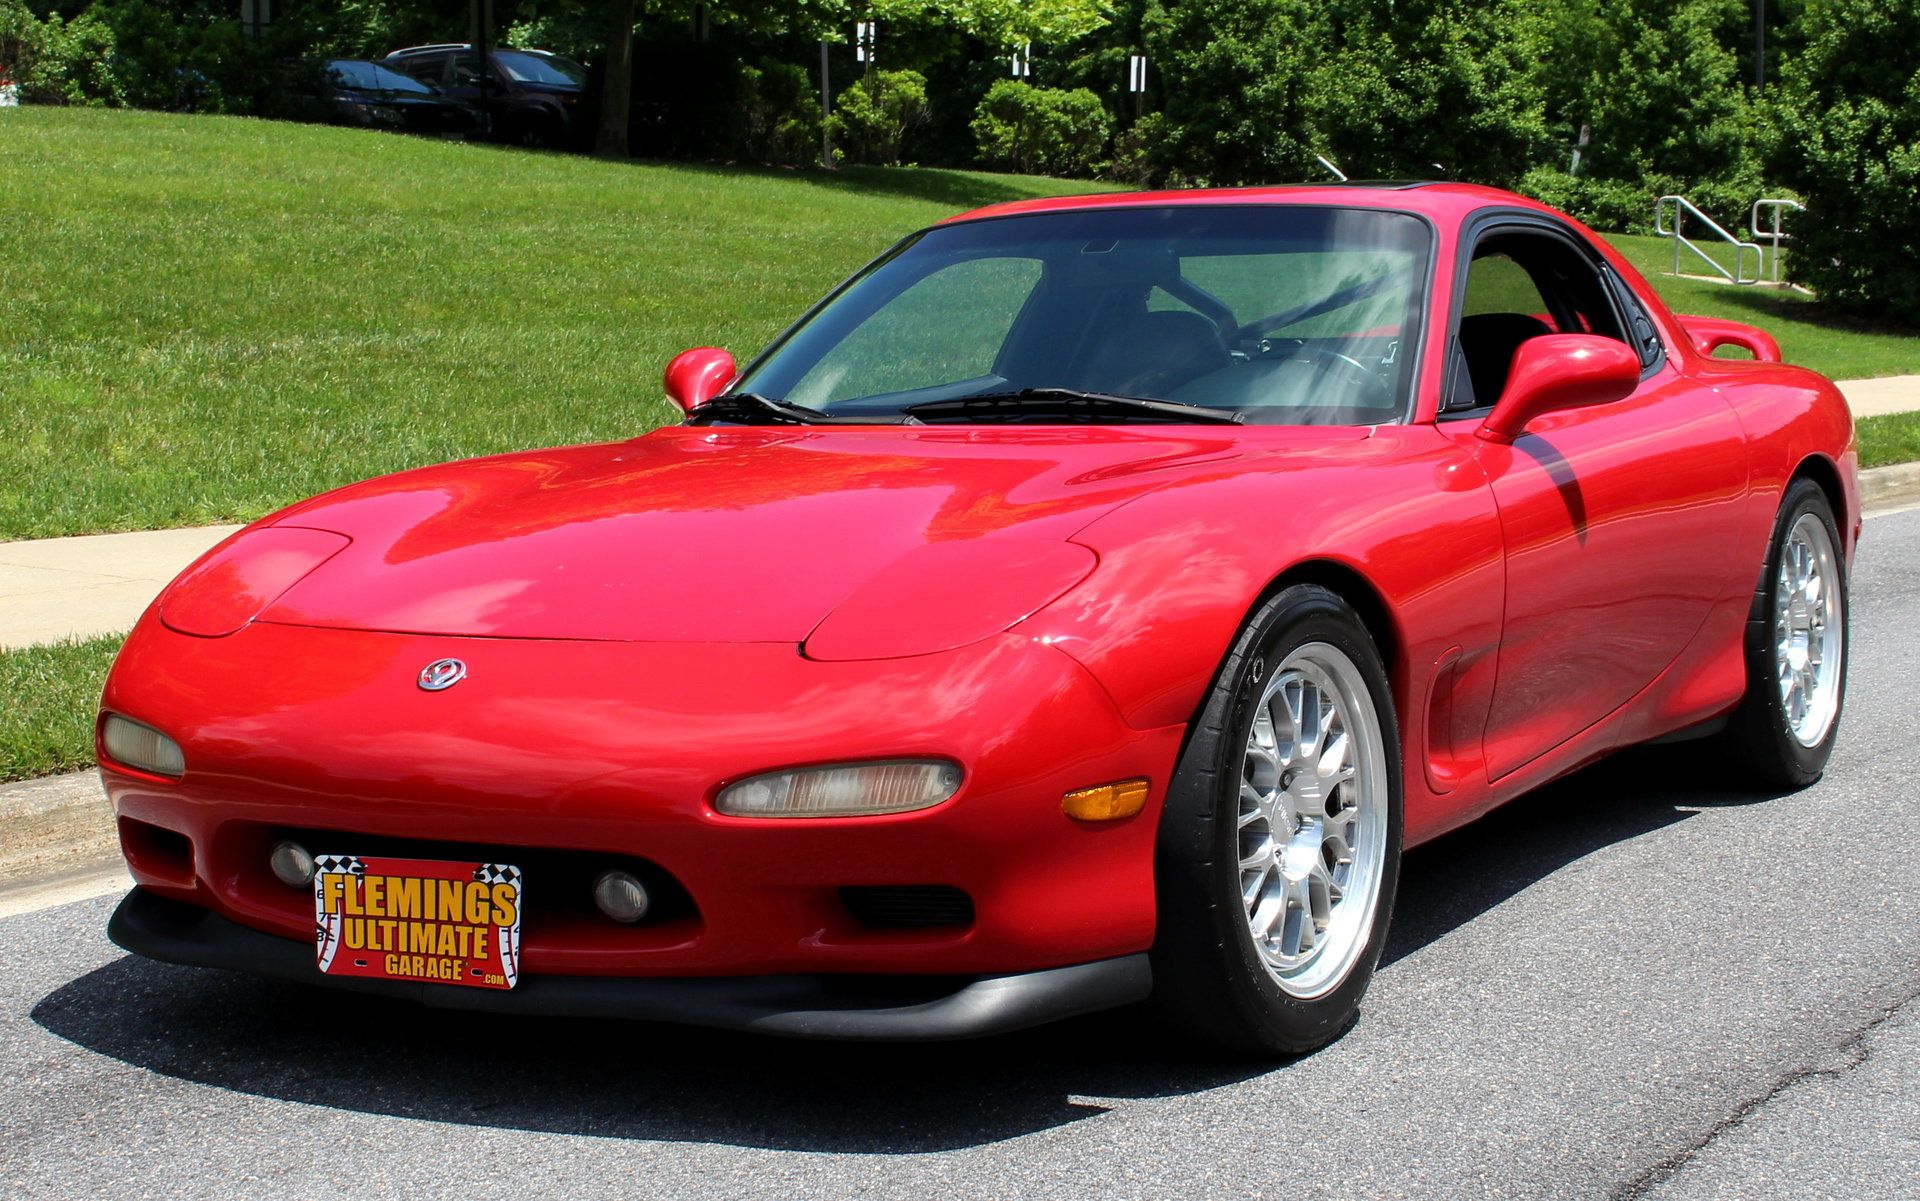 1994 Mazda RX-7 Base 0-60 Times, Top Speed, Specs, Quarter Mile 